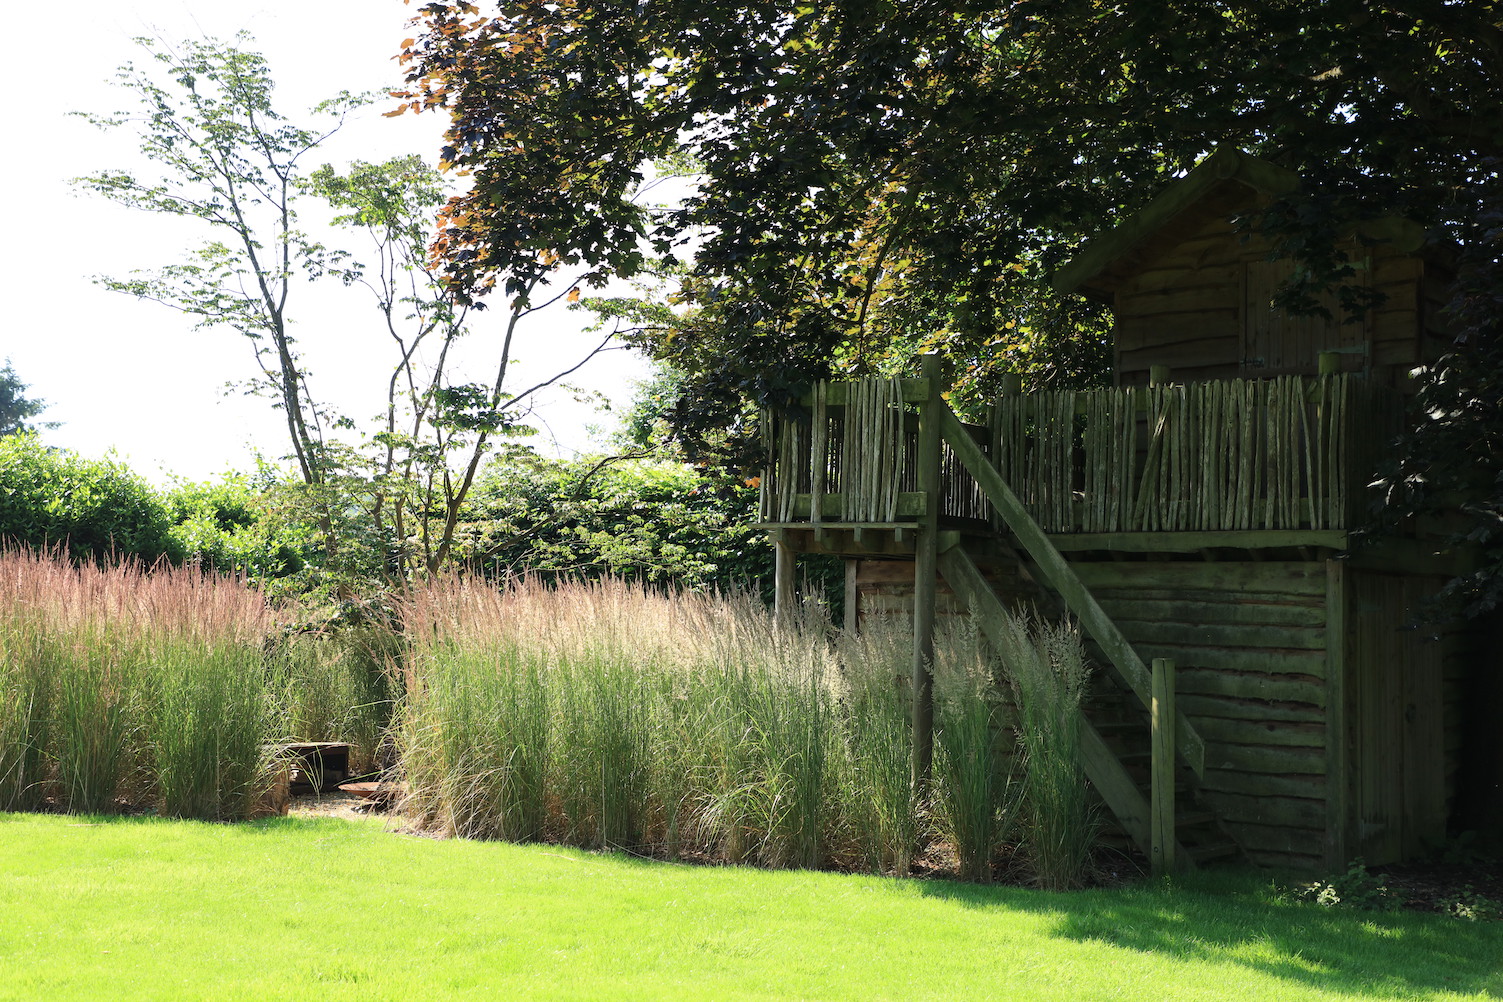 Grass meadow with steps to a wooden tree house